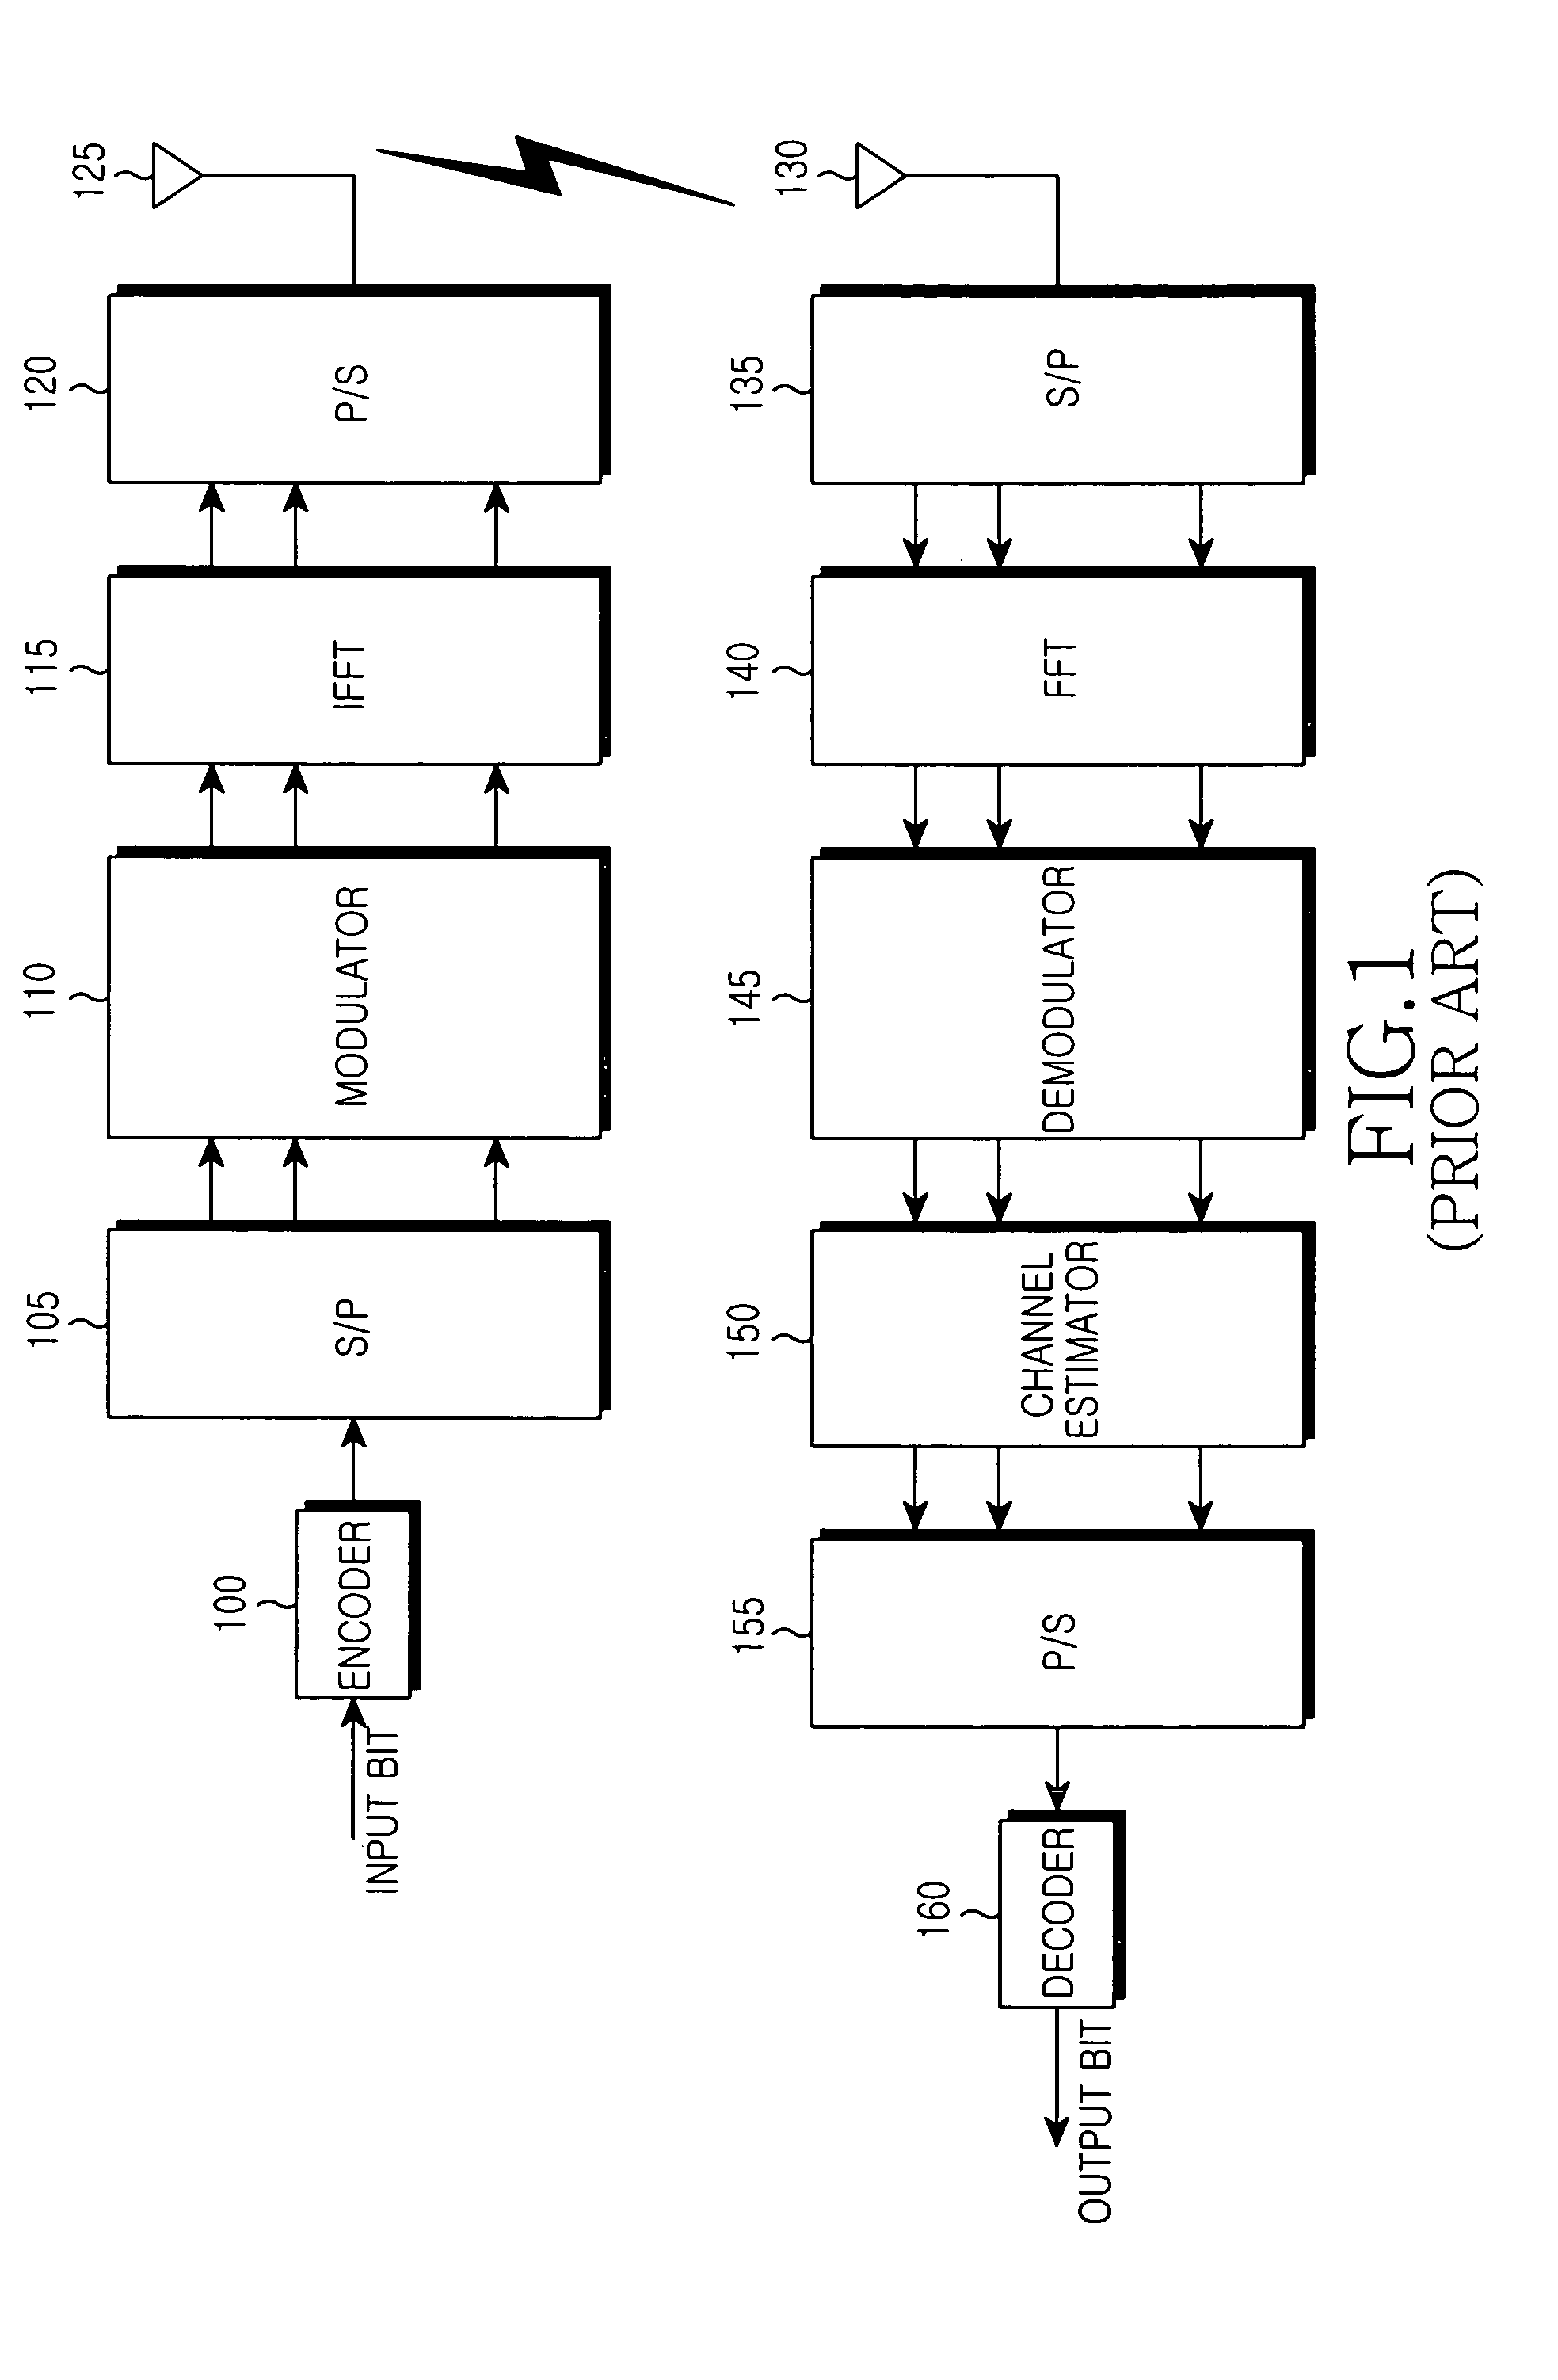 Apparatus and method for performing channel estimation in an orthogonal frequency division multiplexing (OFDM) system using multiple antennas